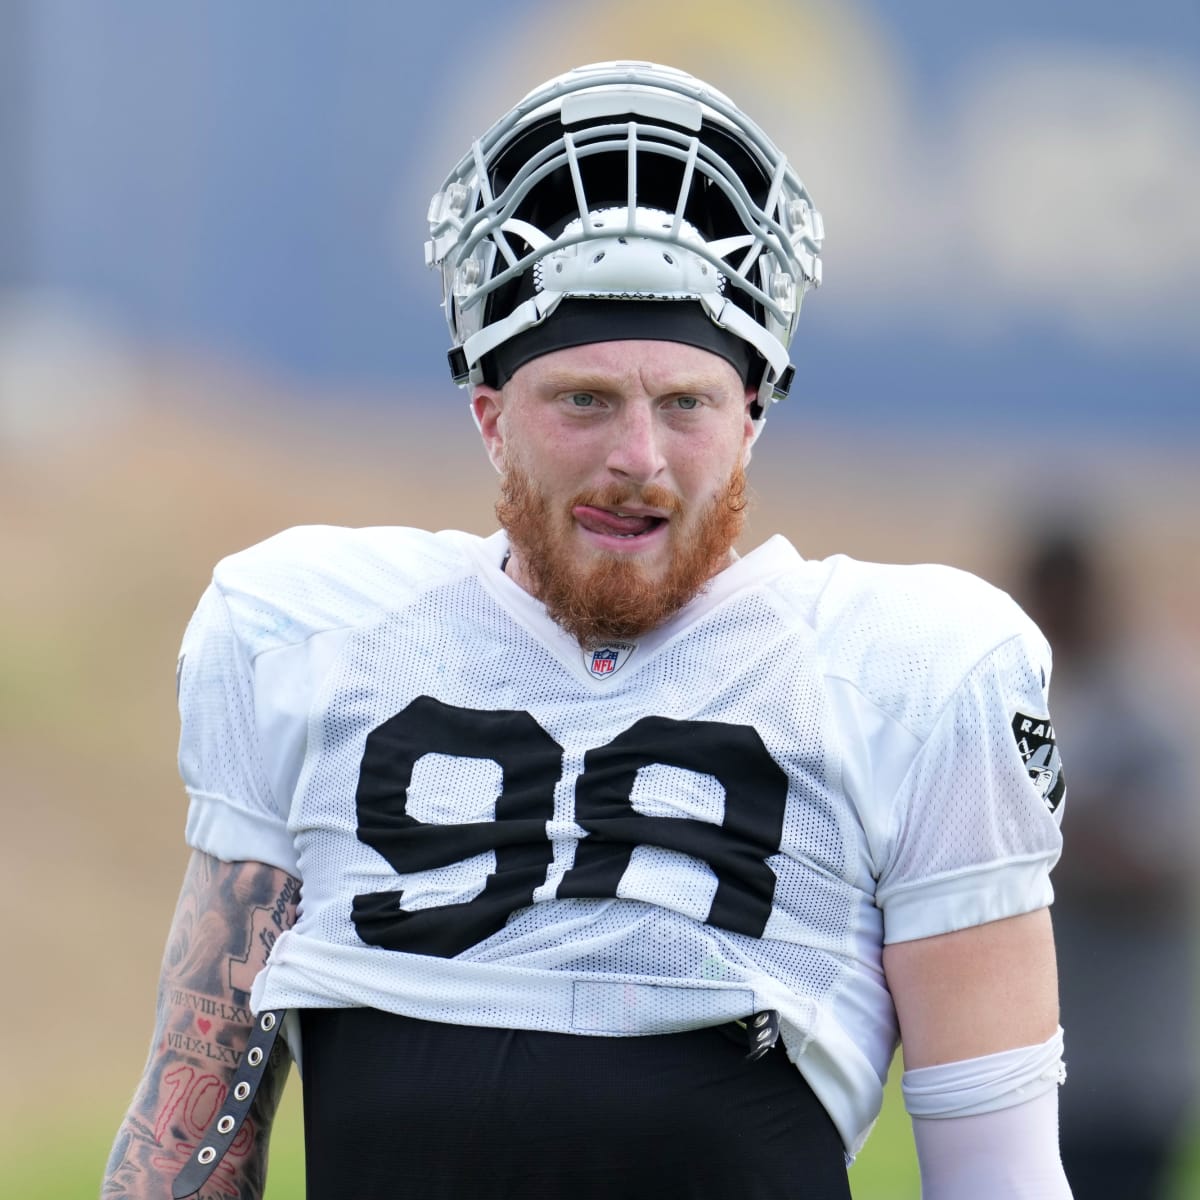 Las Vegas Raiders: Maxx Crosby on the doorstep of being all-time great